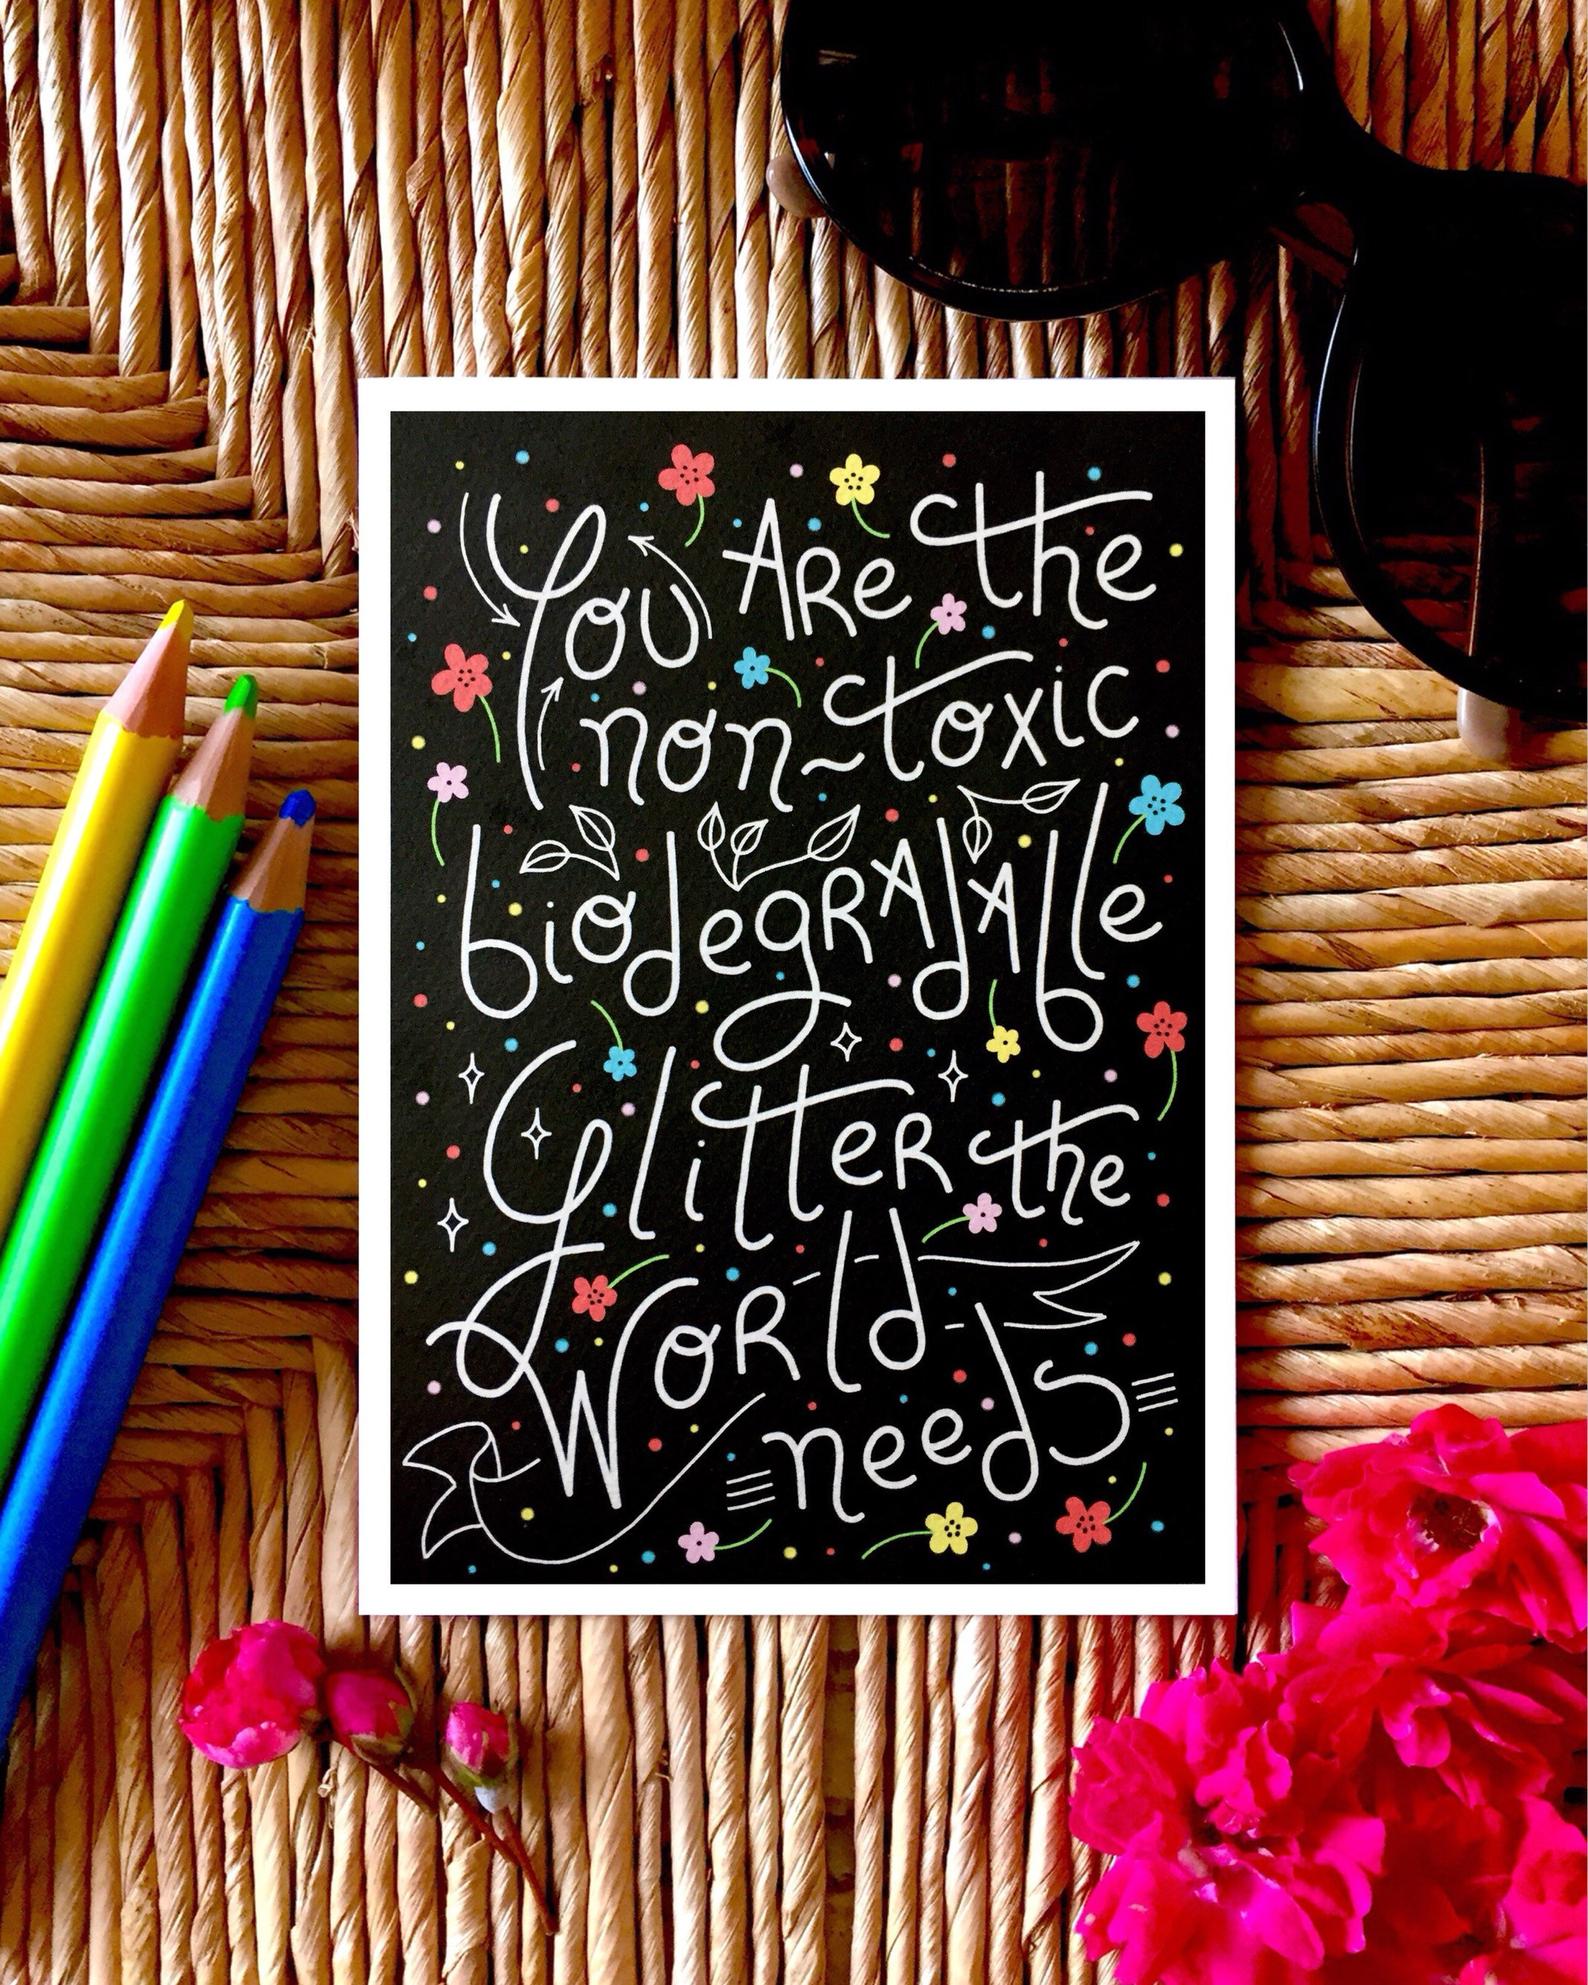 A5 Print - You Are The Non-Toxic Biodegradable Glitter